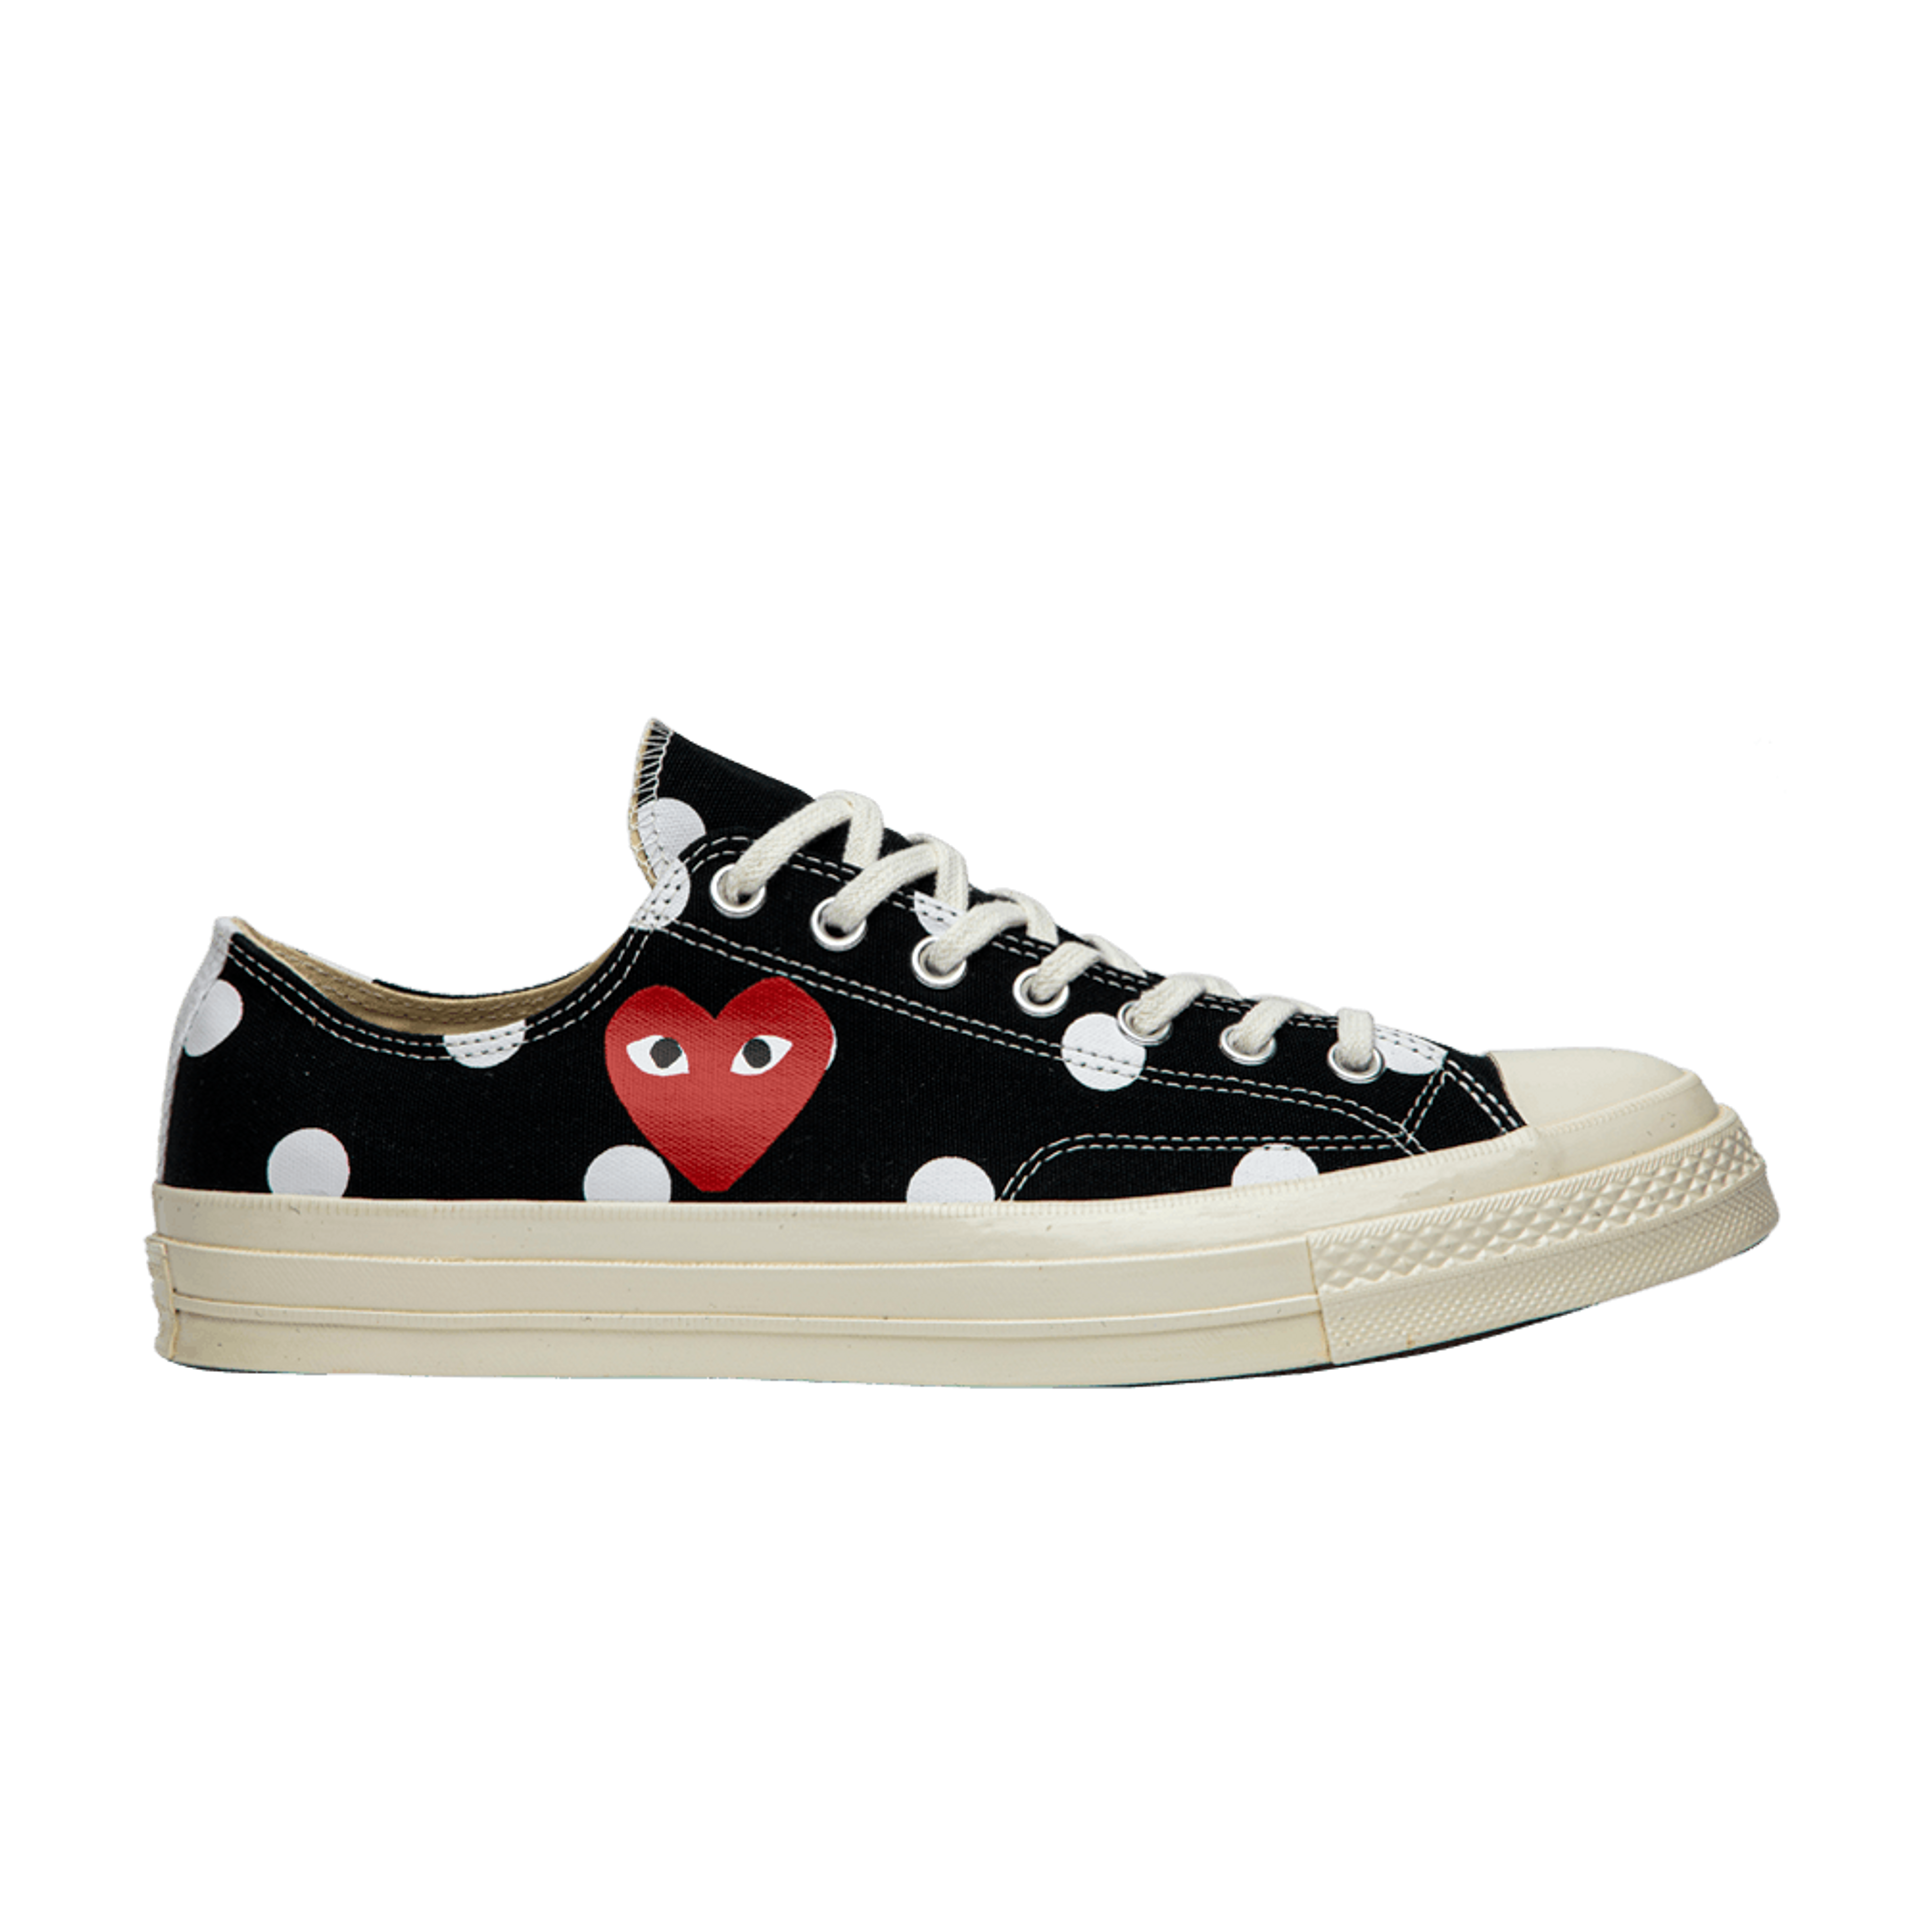 Converse Comme des Garcons x Chuck Taylor All Star 70 Low 'Polka Dot'